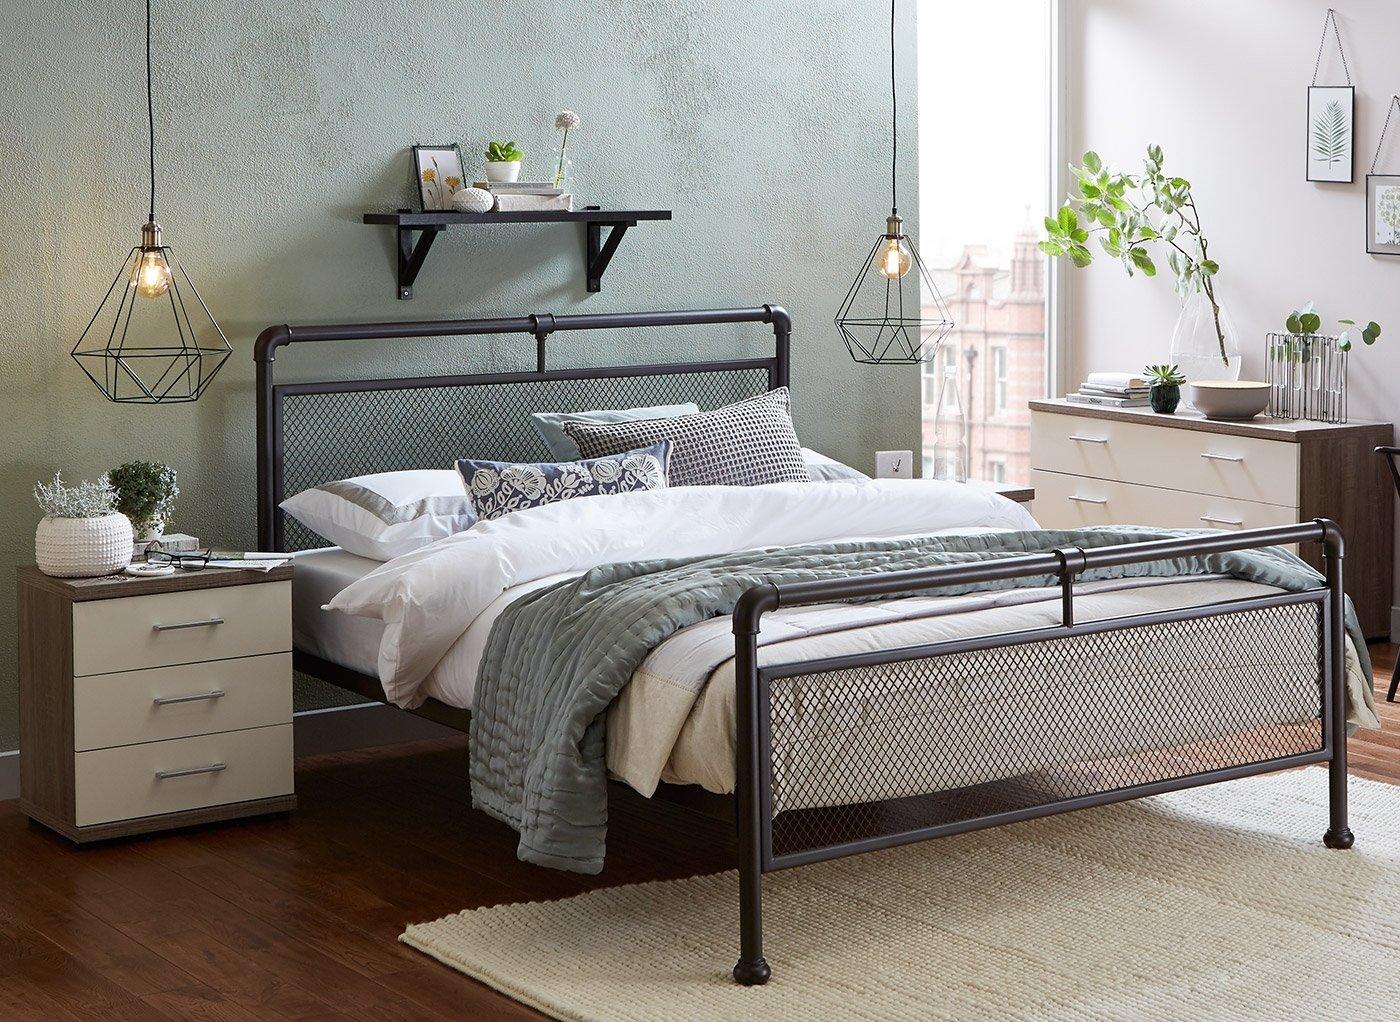 4ft storage beds with mattress